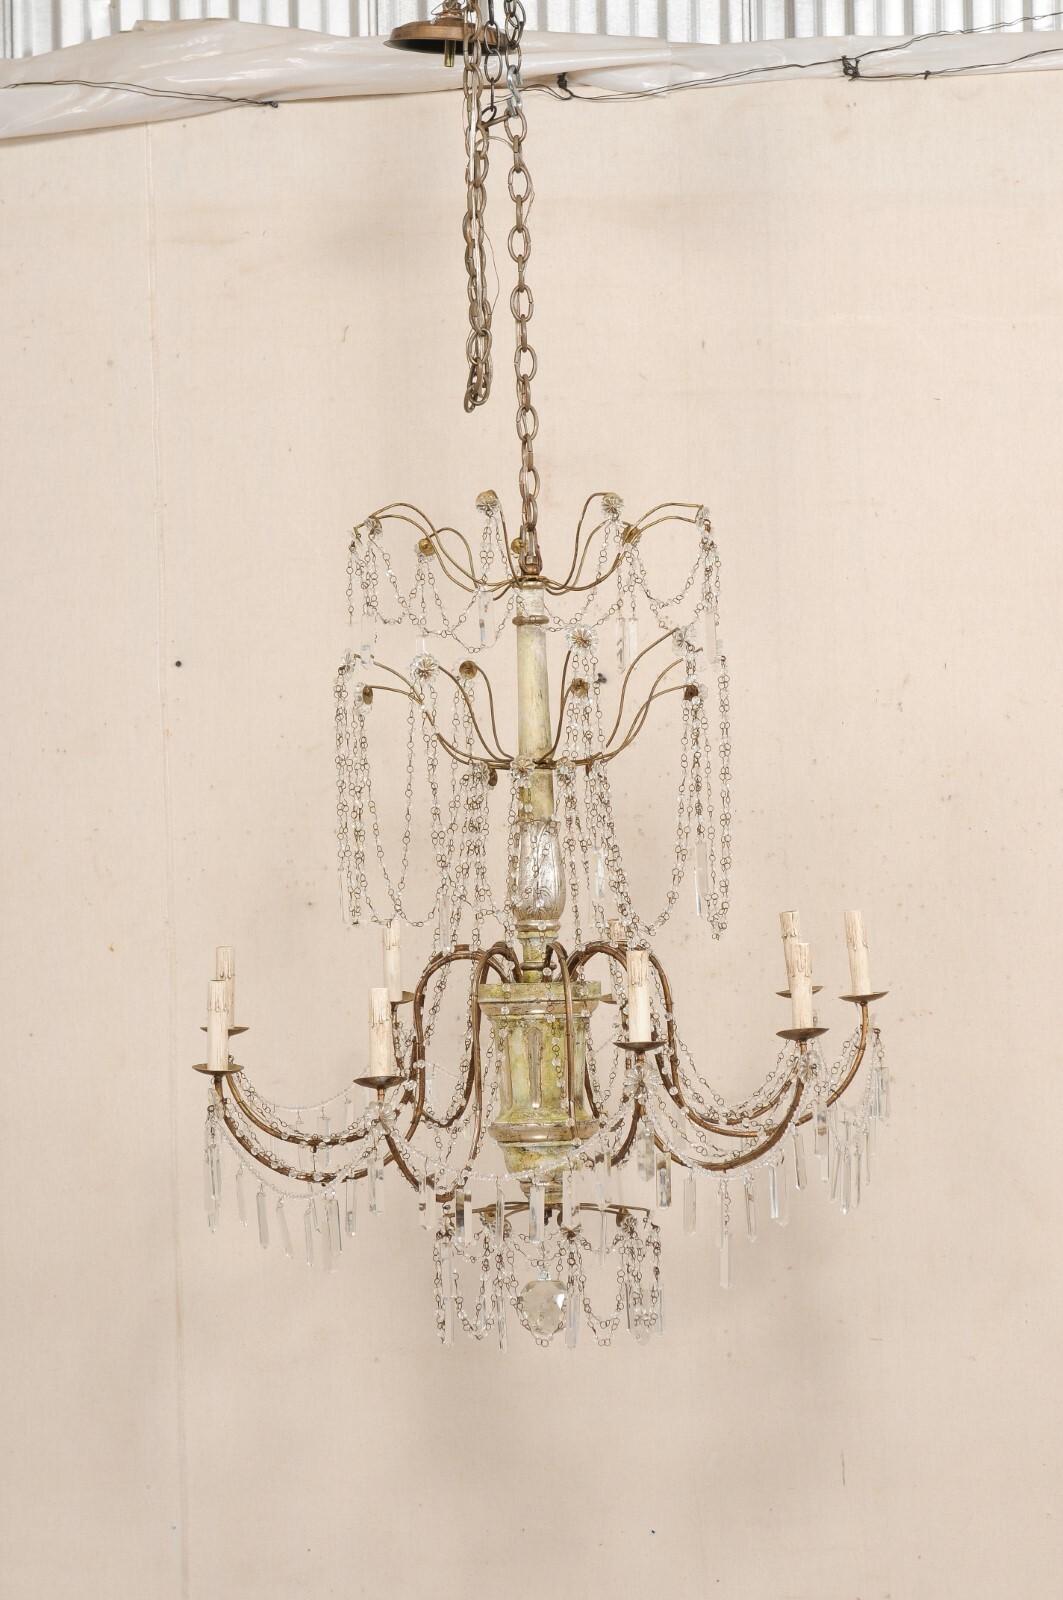 An Italian nine-light crystal chandelier with carved and painted wood central column. This vintage chandelier from Italy has a carved-wood central column, with nine metal s-shaped arms swooping outward, draped with crystal swags and Italian beaded